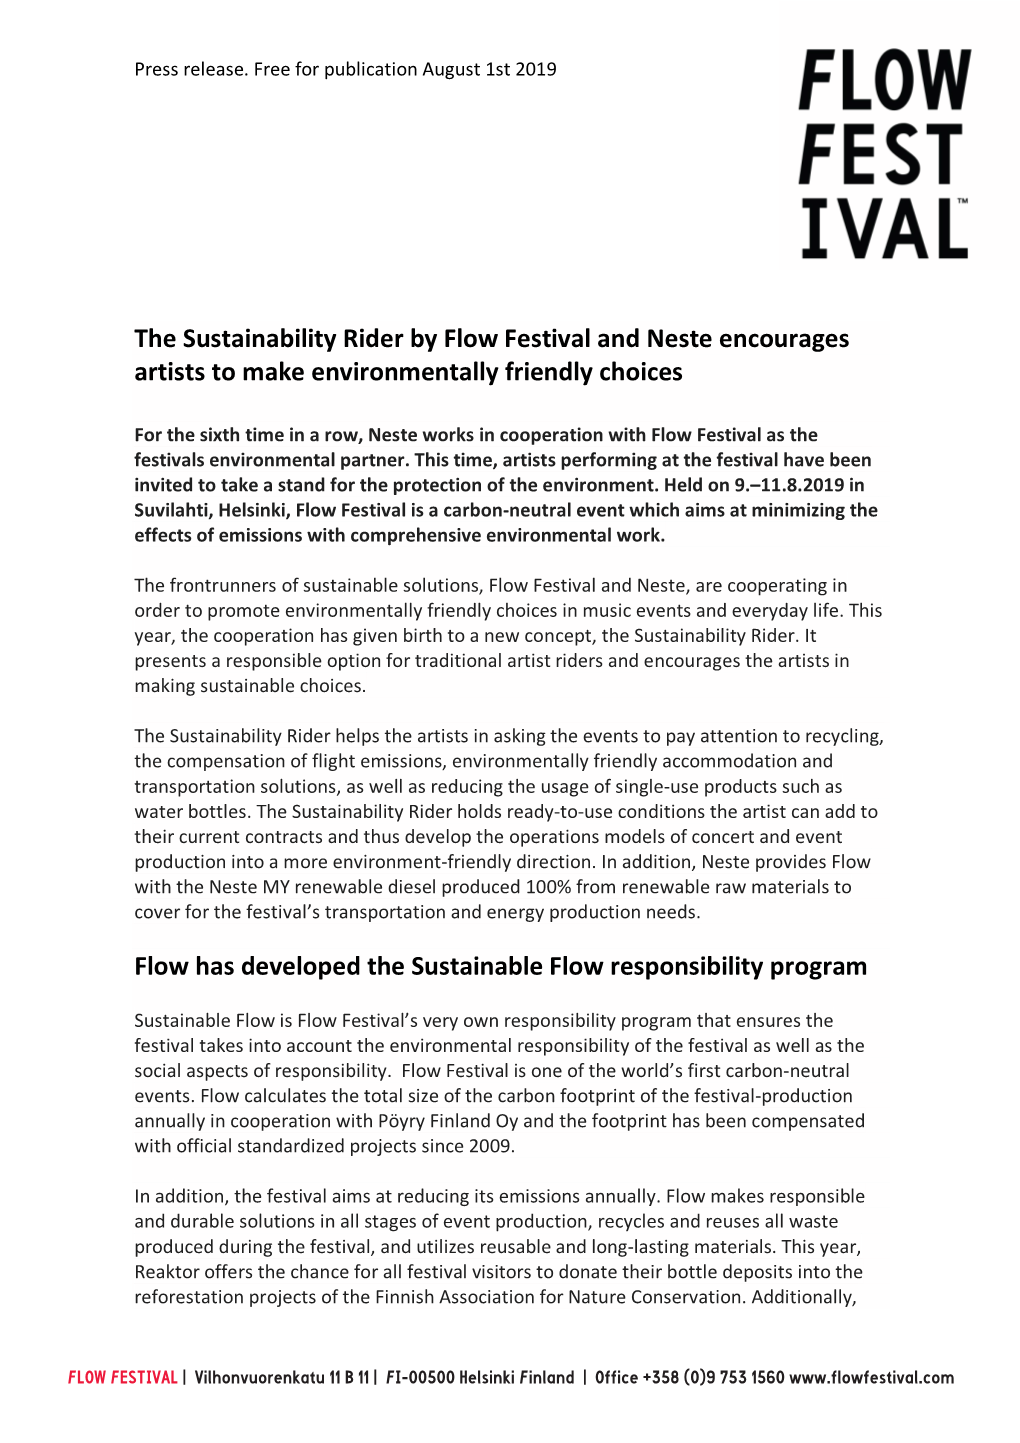 The Sustainability Rider by Flow Festival and Neste Encourages Artists to Make Environmentally Friendly Choices